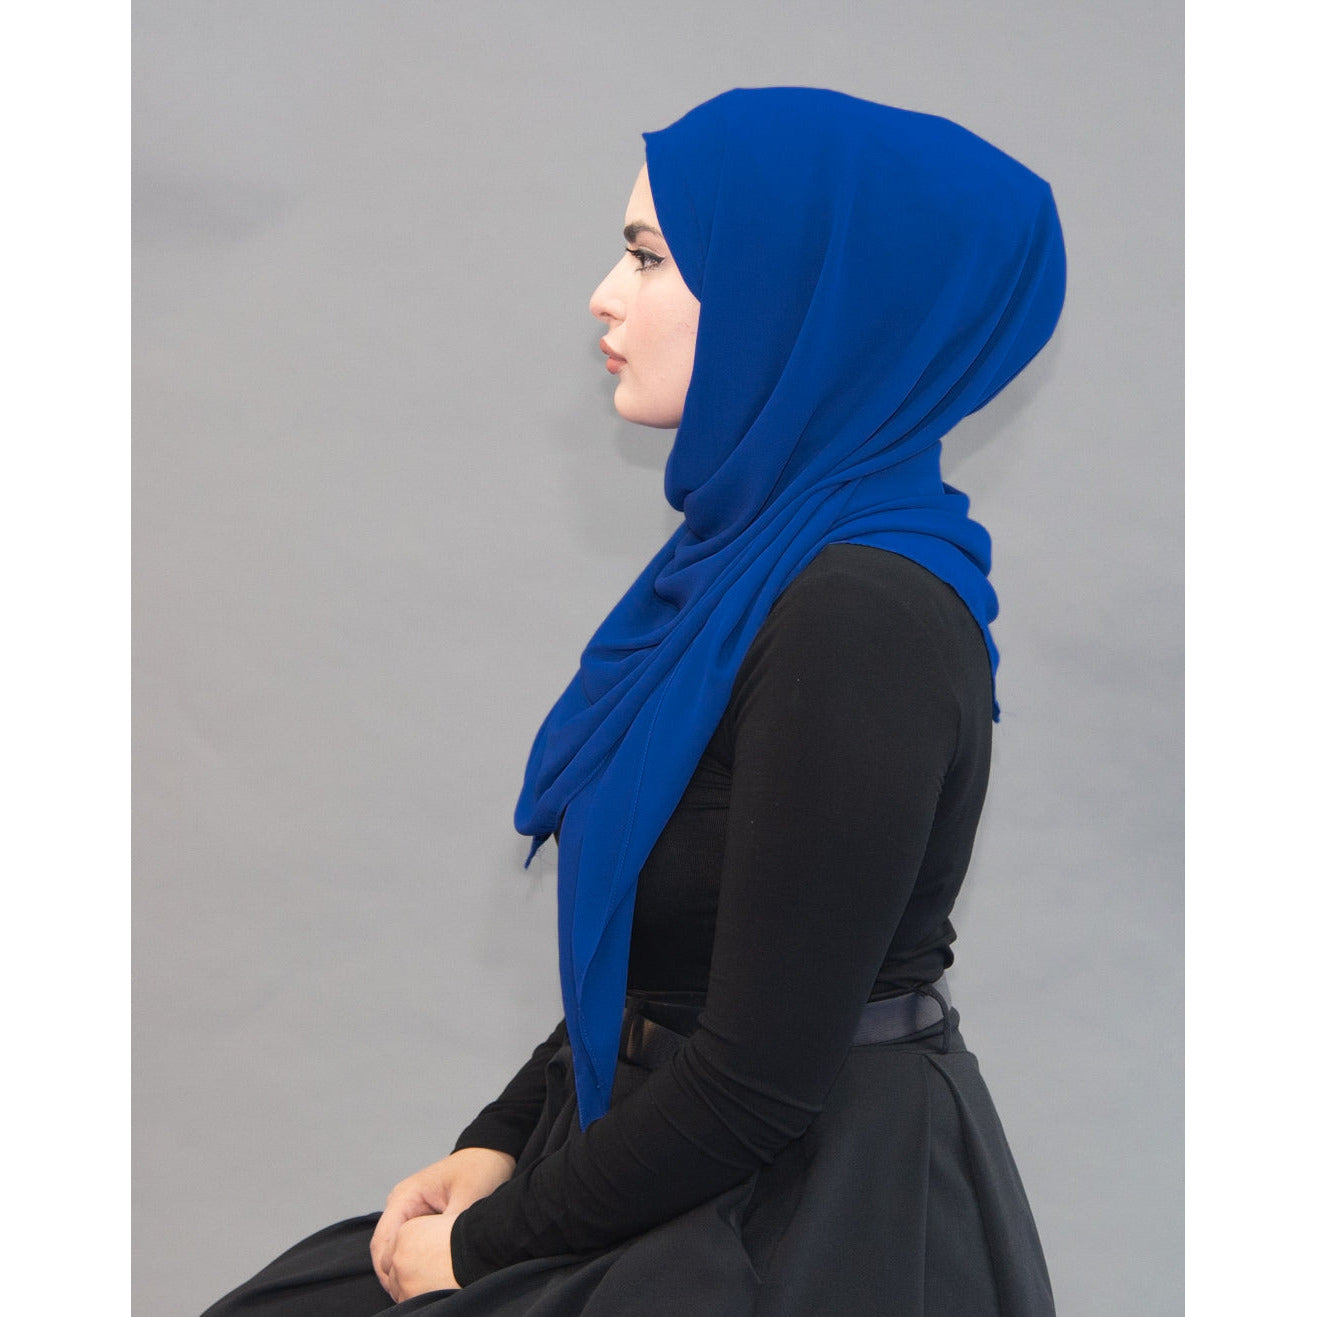 Limited Edition Gold Medallion Hijab / Scarf - Egyptian Blue - Modestia Collection is a Detroit scarf based brand with a curated for Detroiter's and to the eclectic style of scarf lovers around the globe.